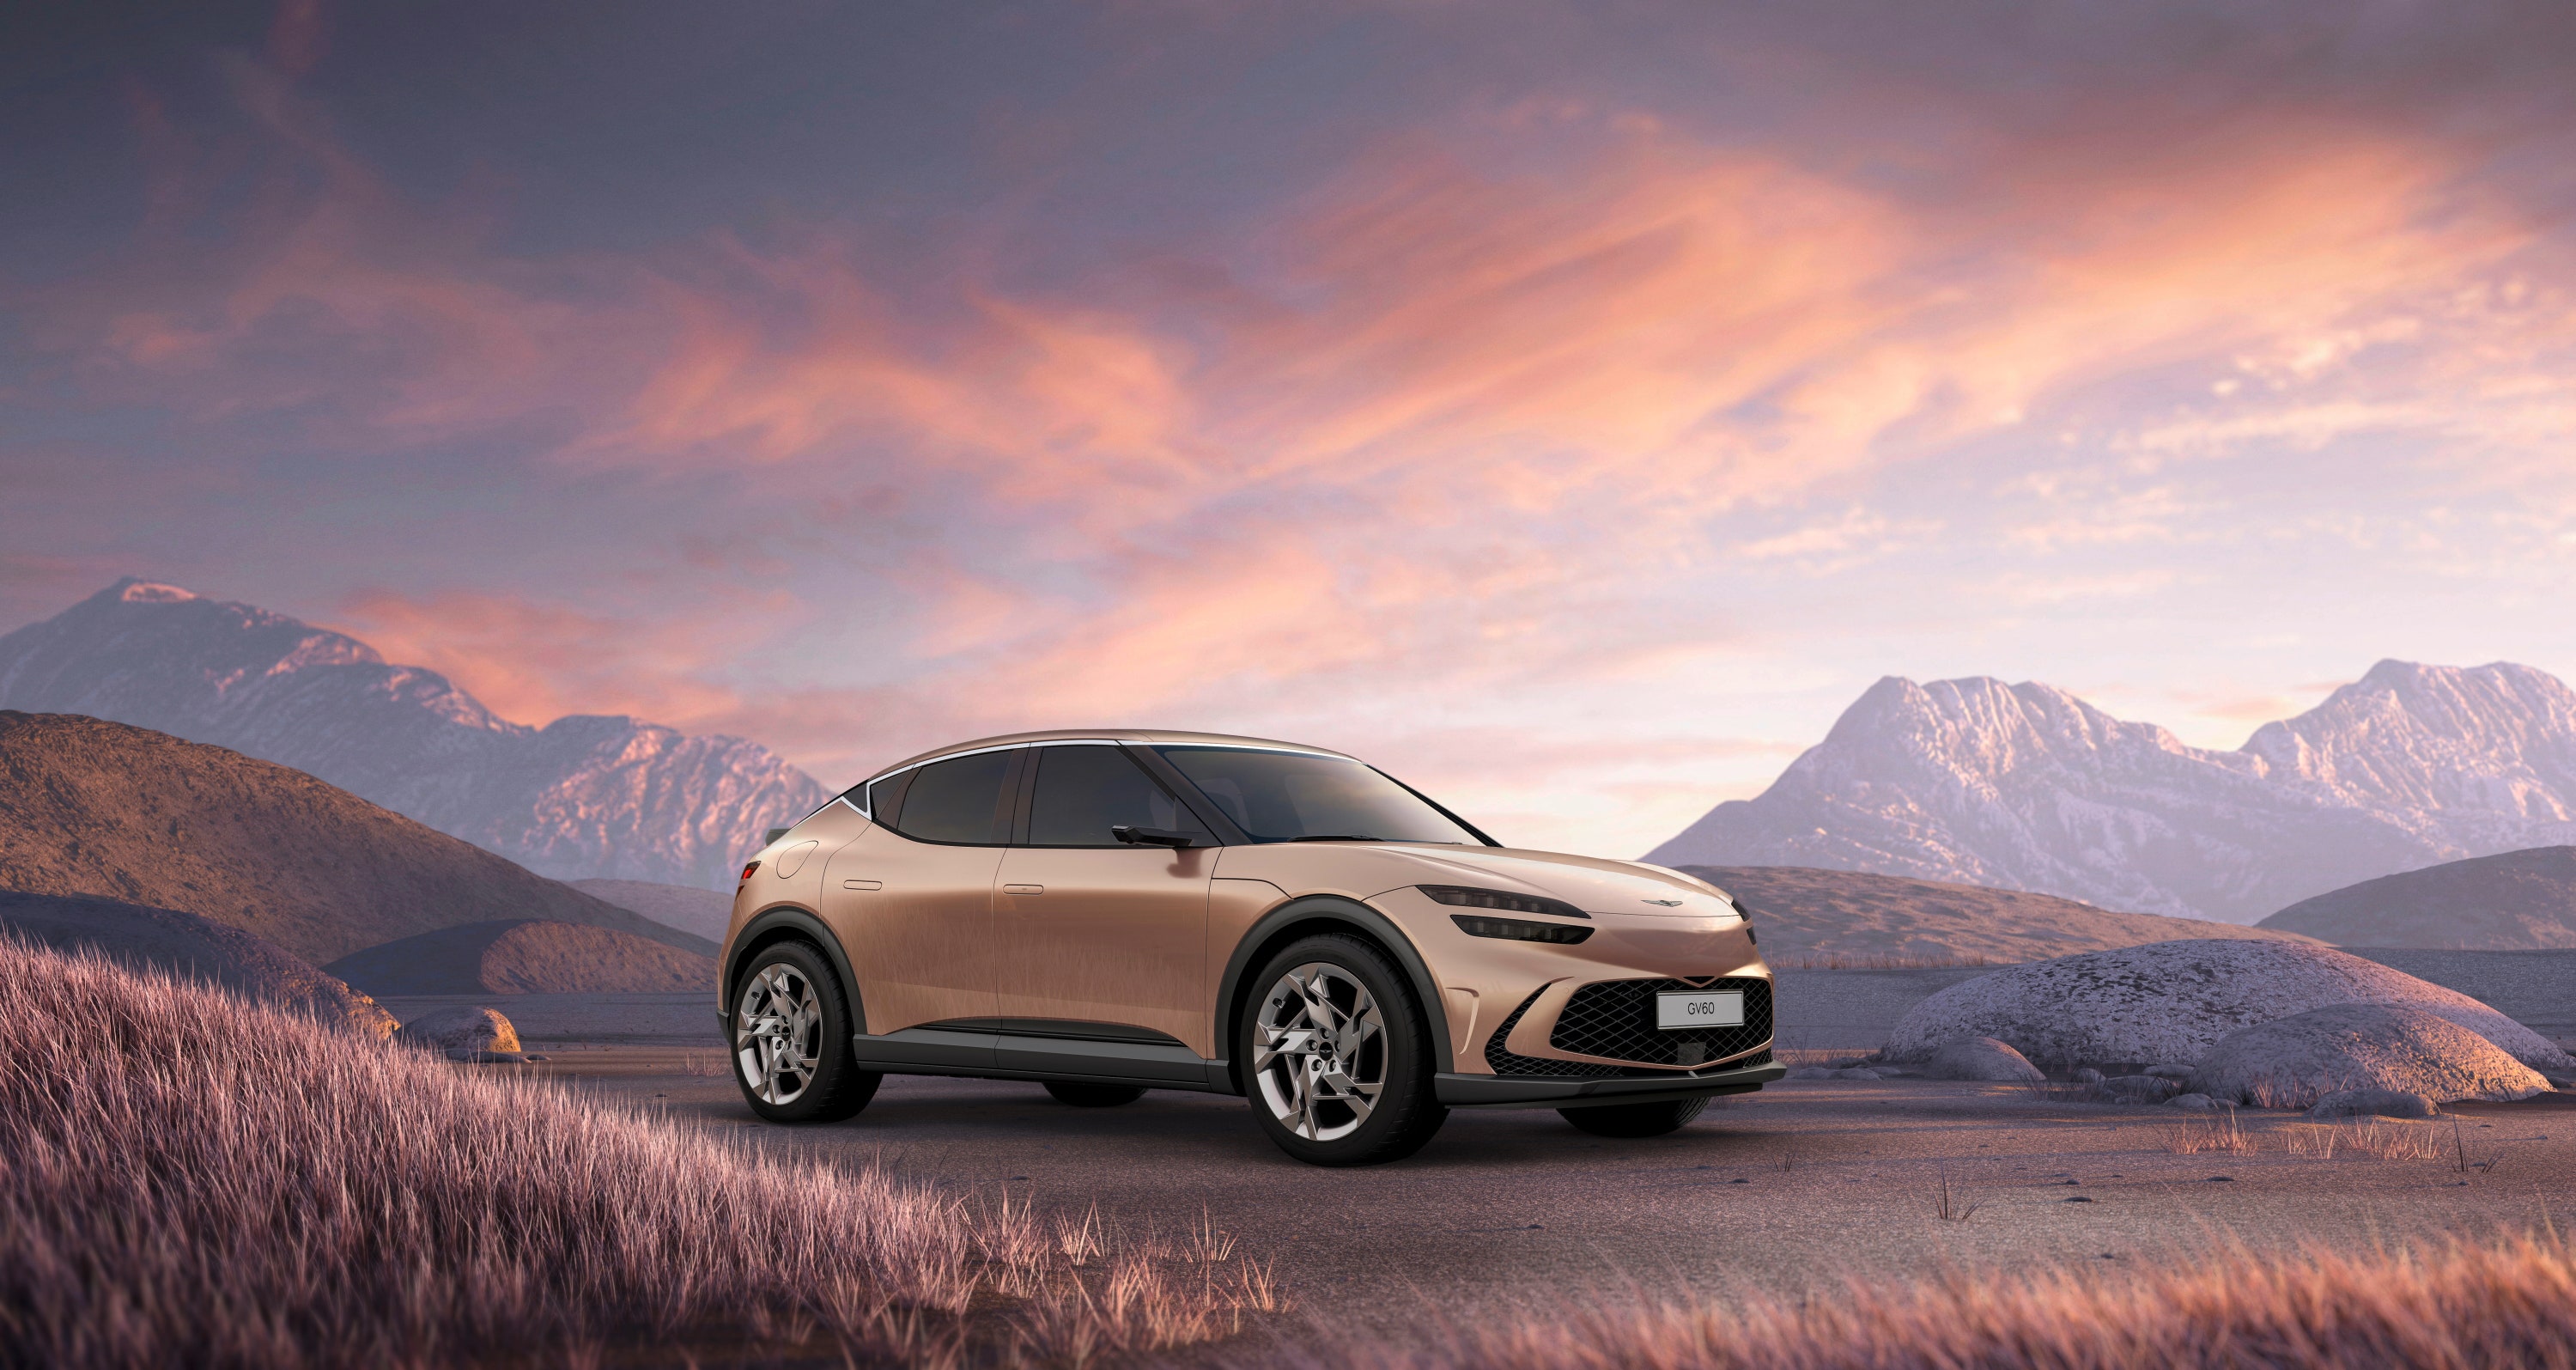 <a href="https://www.architecturaldigest.com/story/designing-michelin-starred-restaurant-car-dealership?mbid=synd_msn_rss&utm_source=msn&utm_medium=syndication">Hyundai’s upscale brand has impressed us</a> with stylish, luxurious, fun-to-drive vehicles with intriguing design and tech flourishes. The GV60 fits that template, offering lovely manners with some joyous delight, like a camera-based door lock and a rotating disco ball shifter for the transmission. <em><strong>$62,000 (estimated) - 264 Miles</strong></em><p>Sign up for our newsletter to get the latest in design, decorating, celebrity style, shopping, and more.</p><a href="https://www.architecturaldigest.com/newsletter/subscribe?sourceCode=msnsend">Sign Up Now</a>